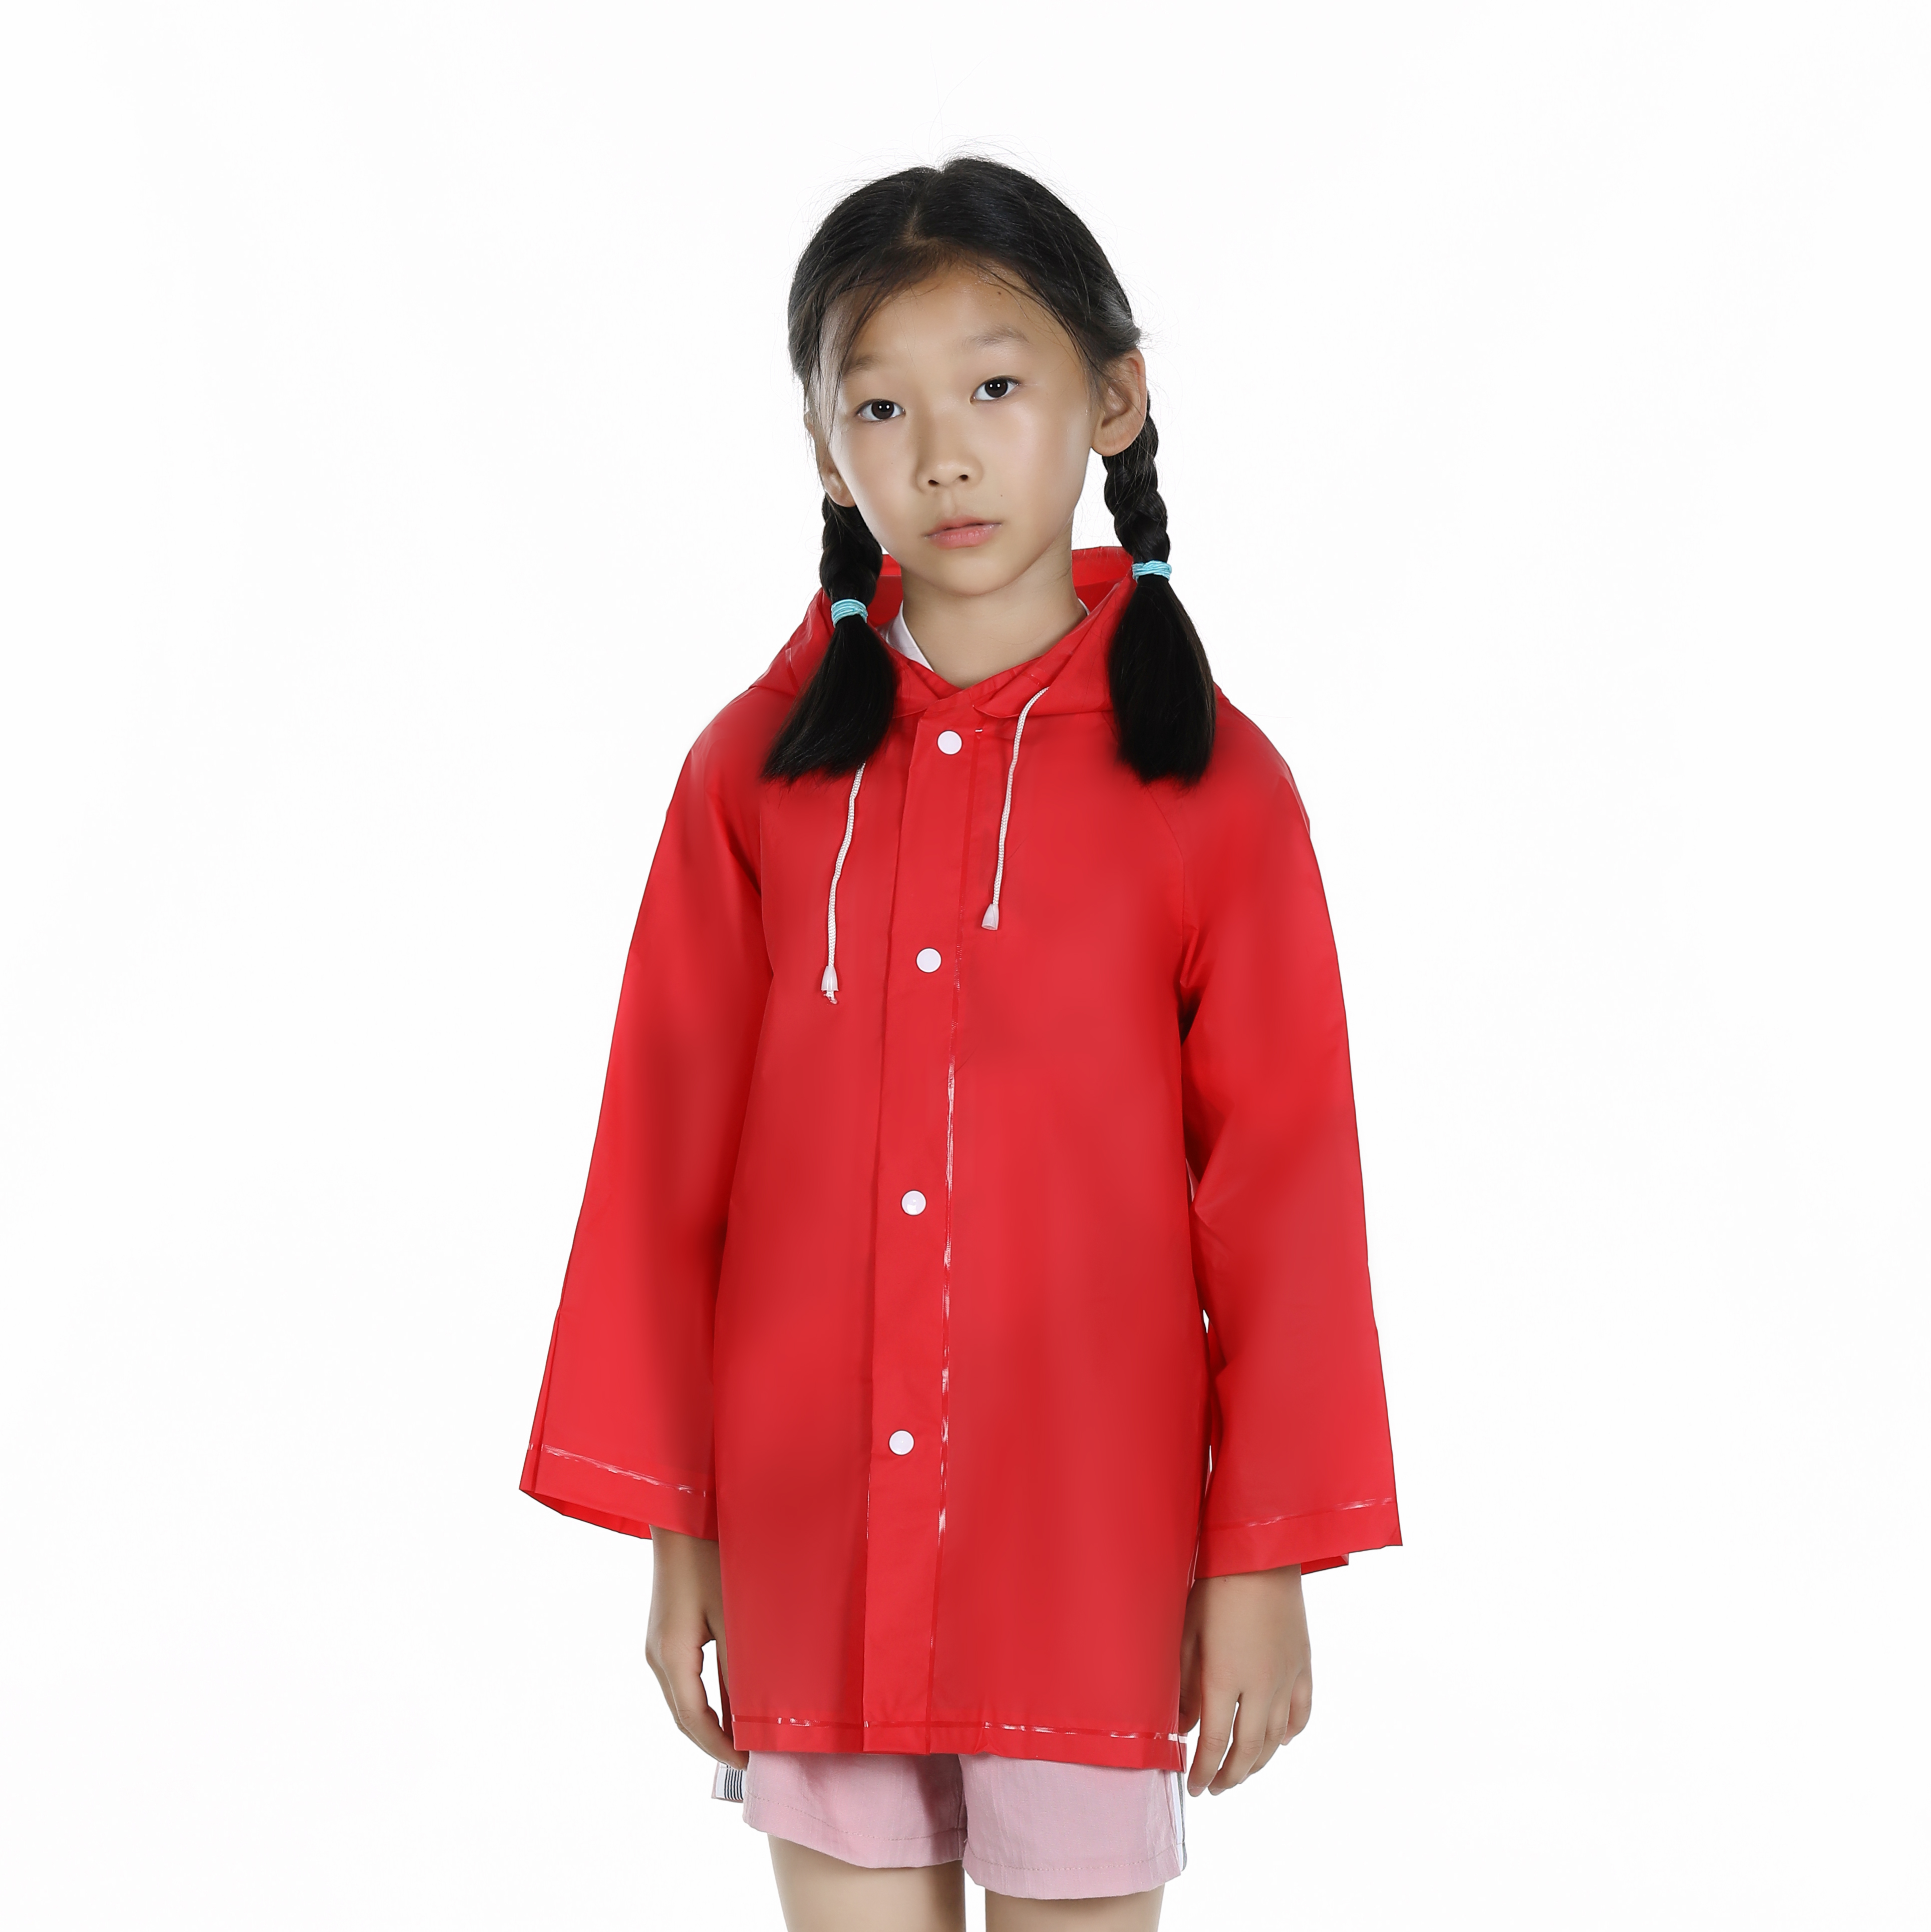 Thick Children Raincoats Kids Waterproof with Hood in Good Quality